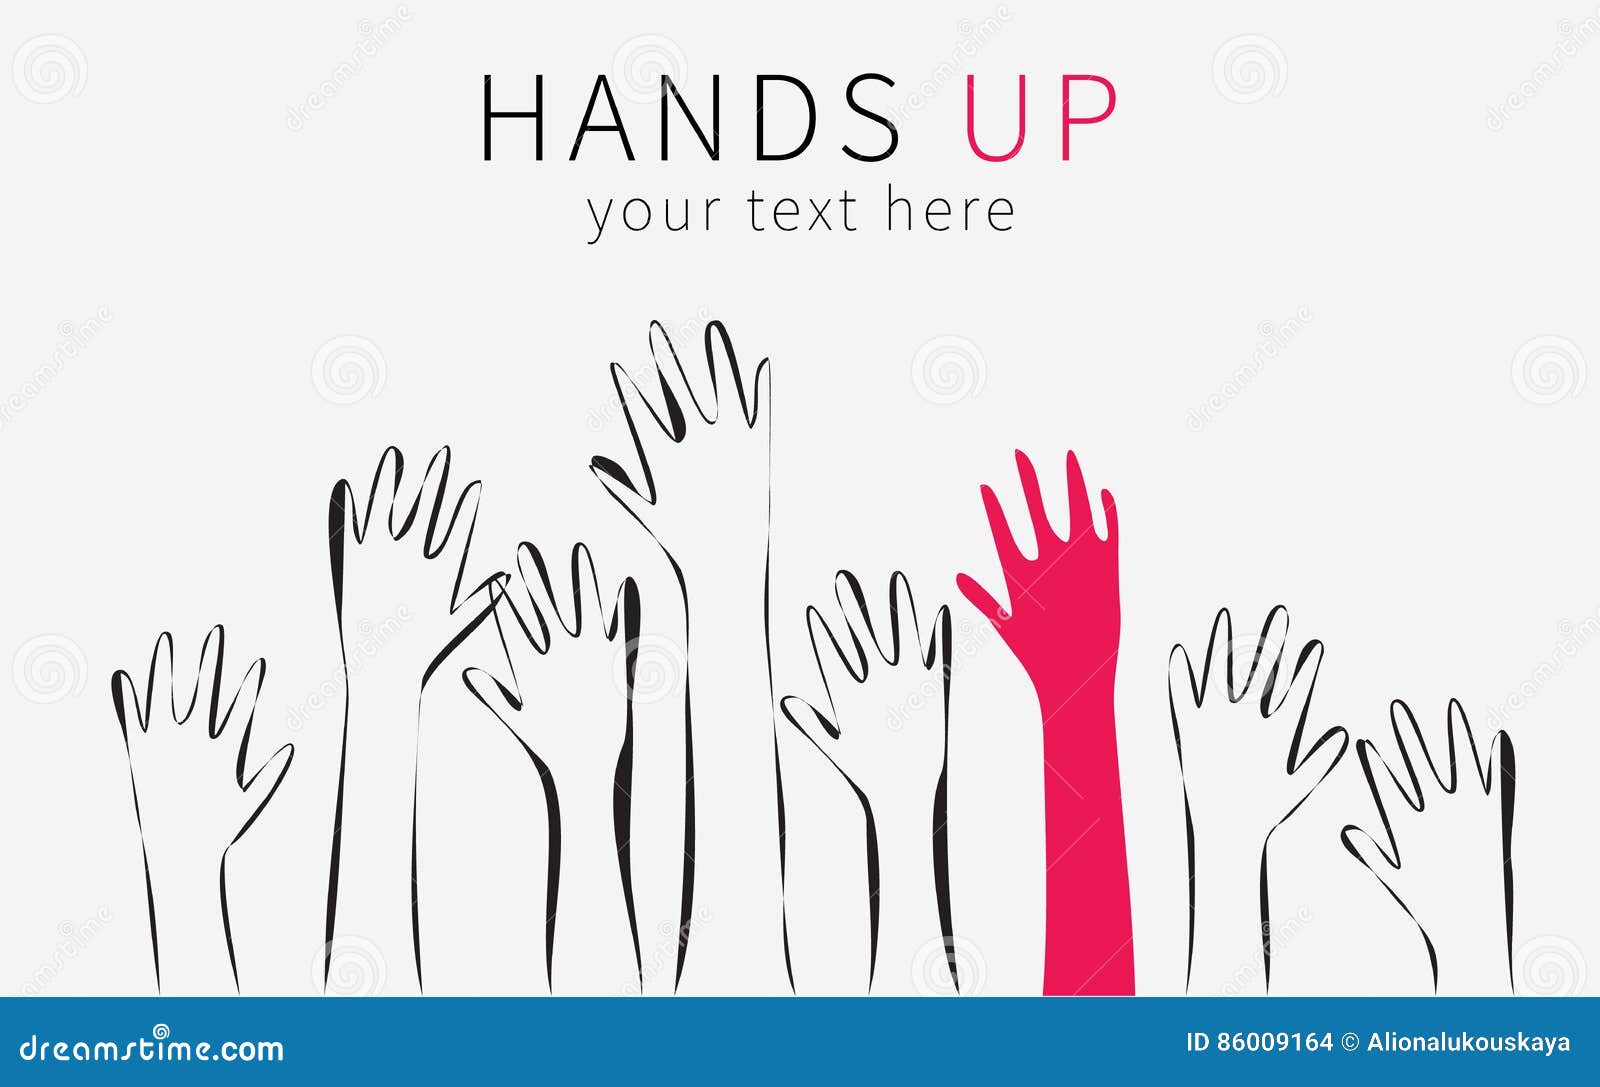 Hands Up Silhouette. Monochrome Cartoon Hands Raised Up In The Air, The ...